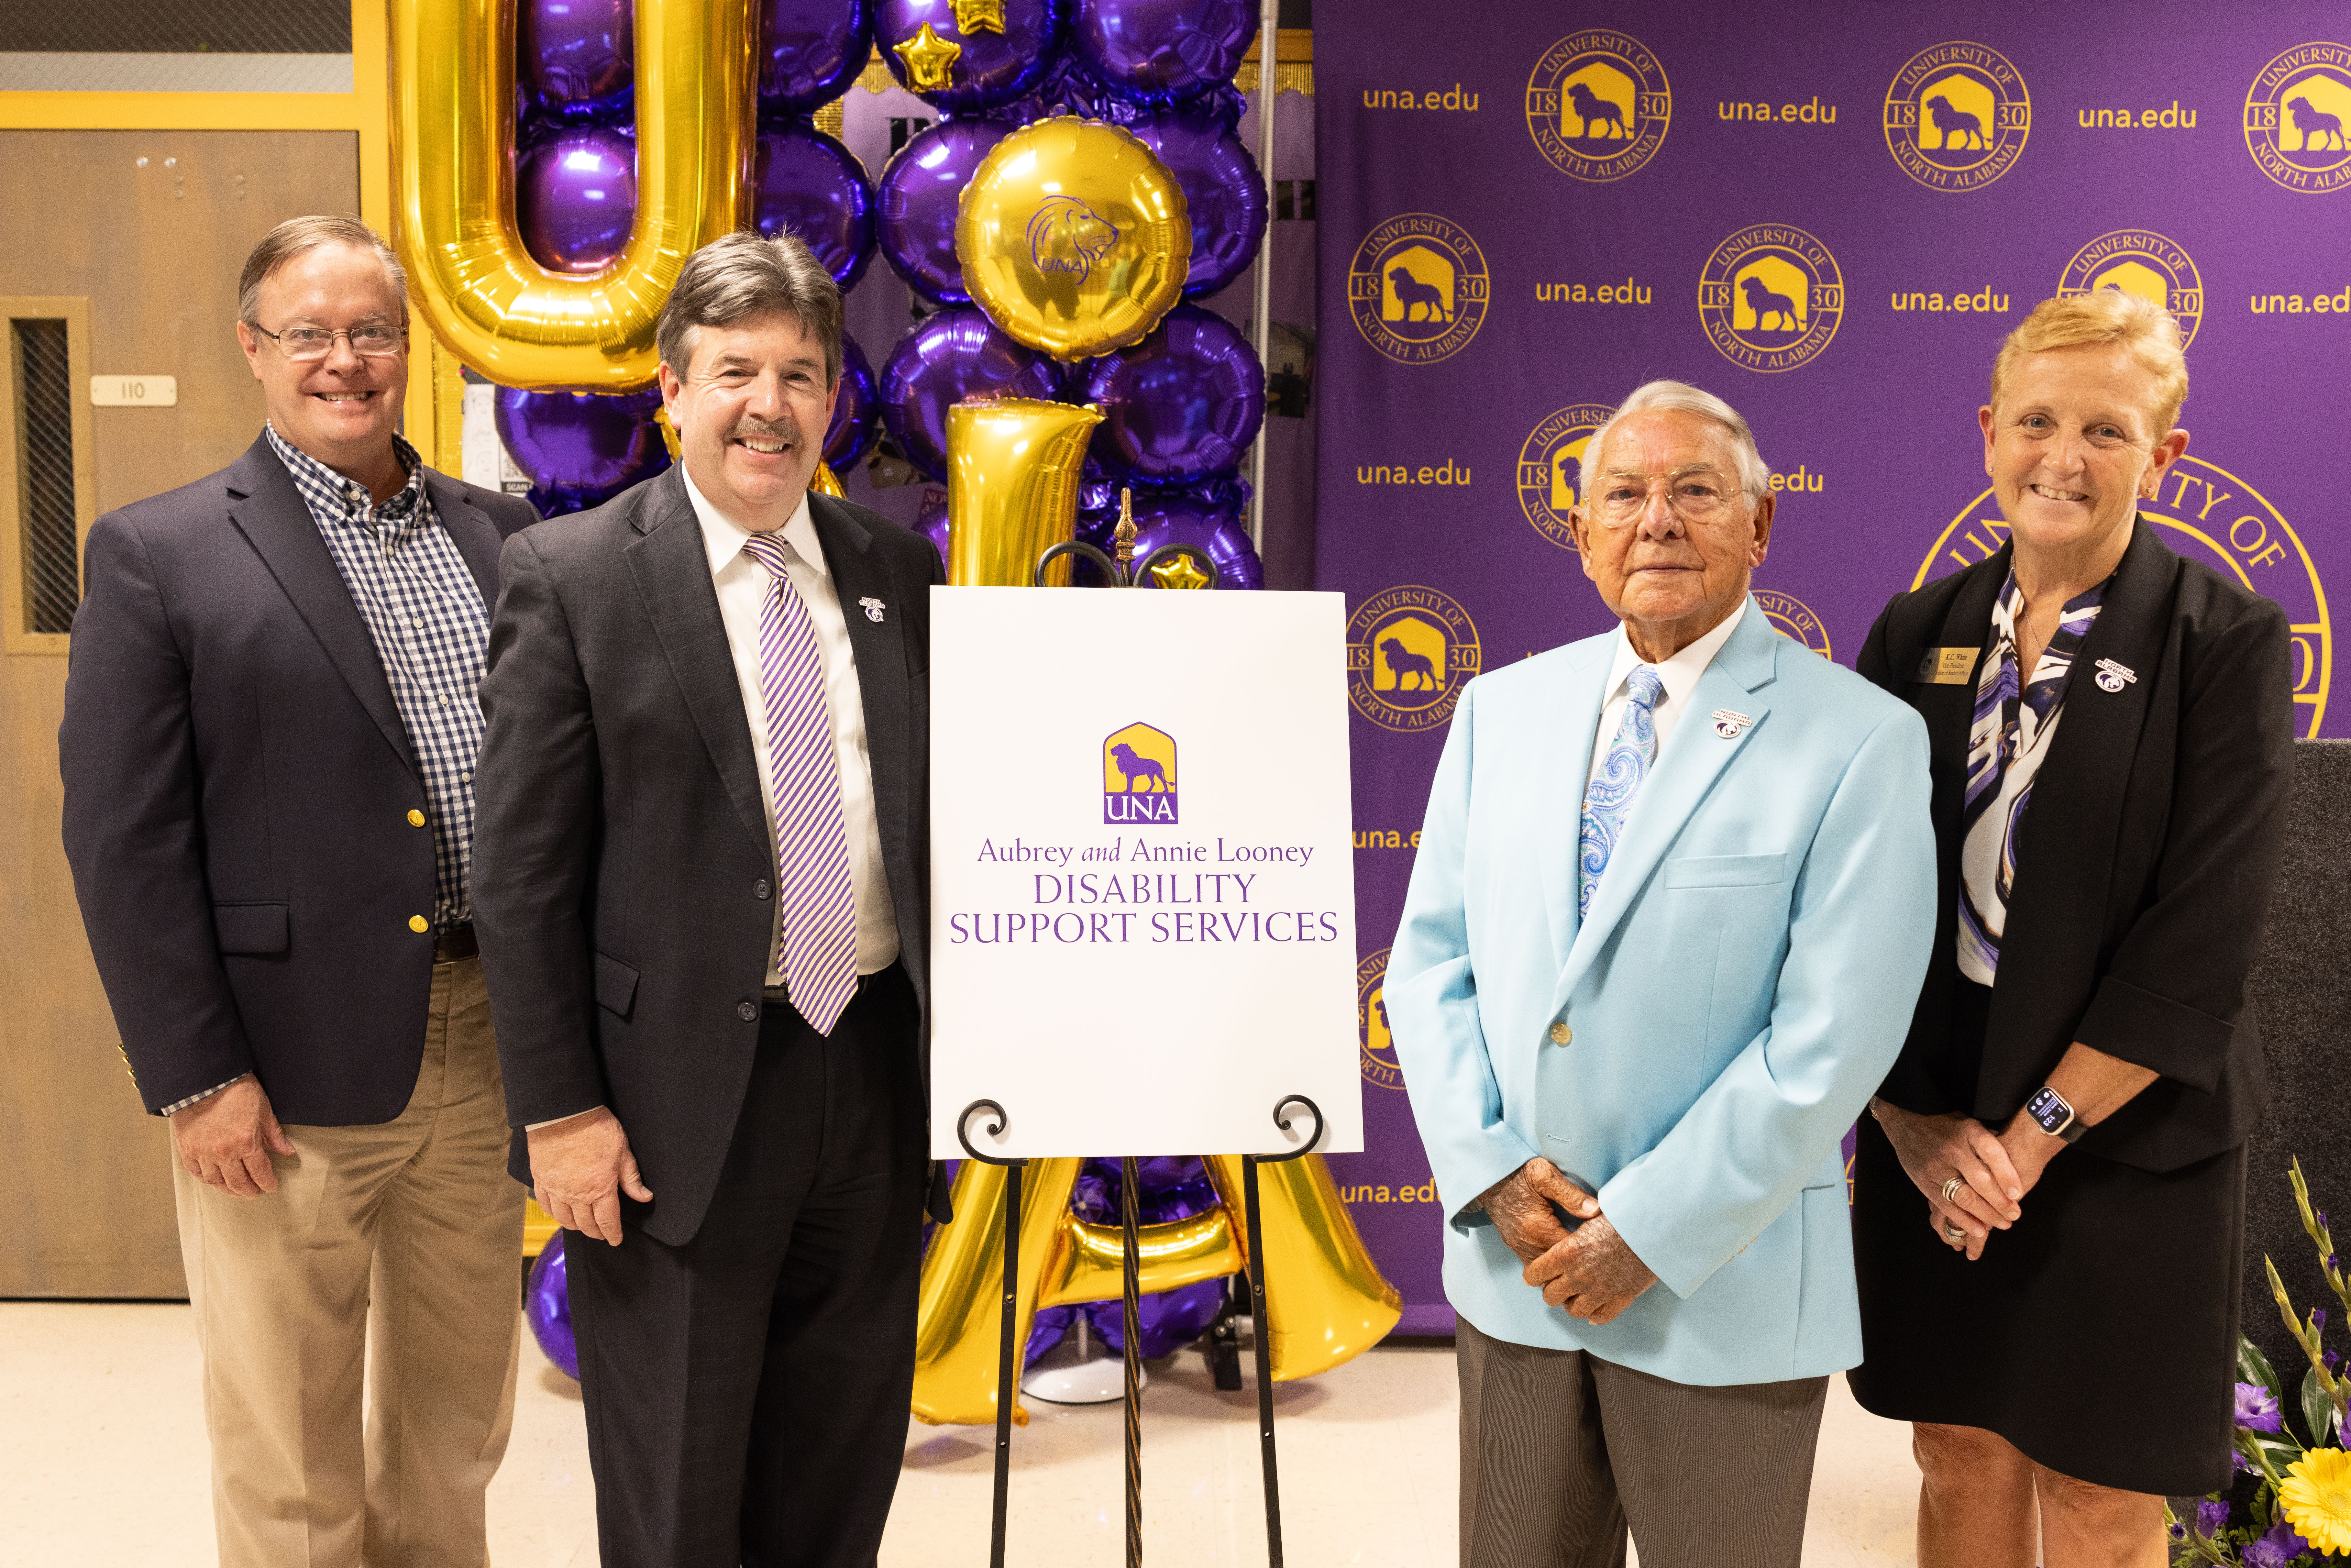 Col. Milton Looney named UNA's Disability Support Services in honor of his parents, Aubrey and Annie Looney, in a ceremony that includes Provost Dr. Brien Smith, President Dr. Ken Kitts, and Dr. K.C. White, Vice President for Student Affairs.